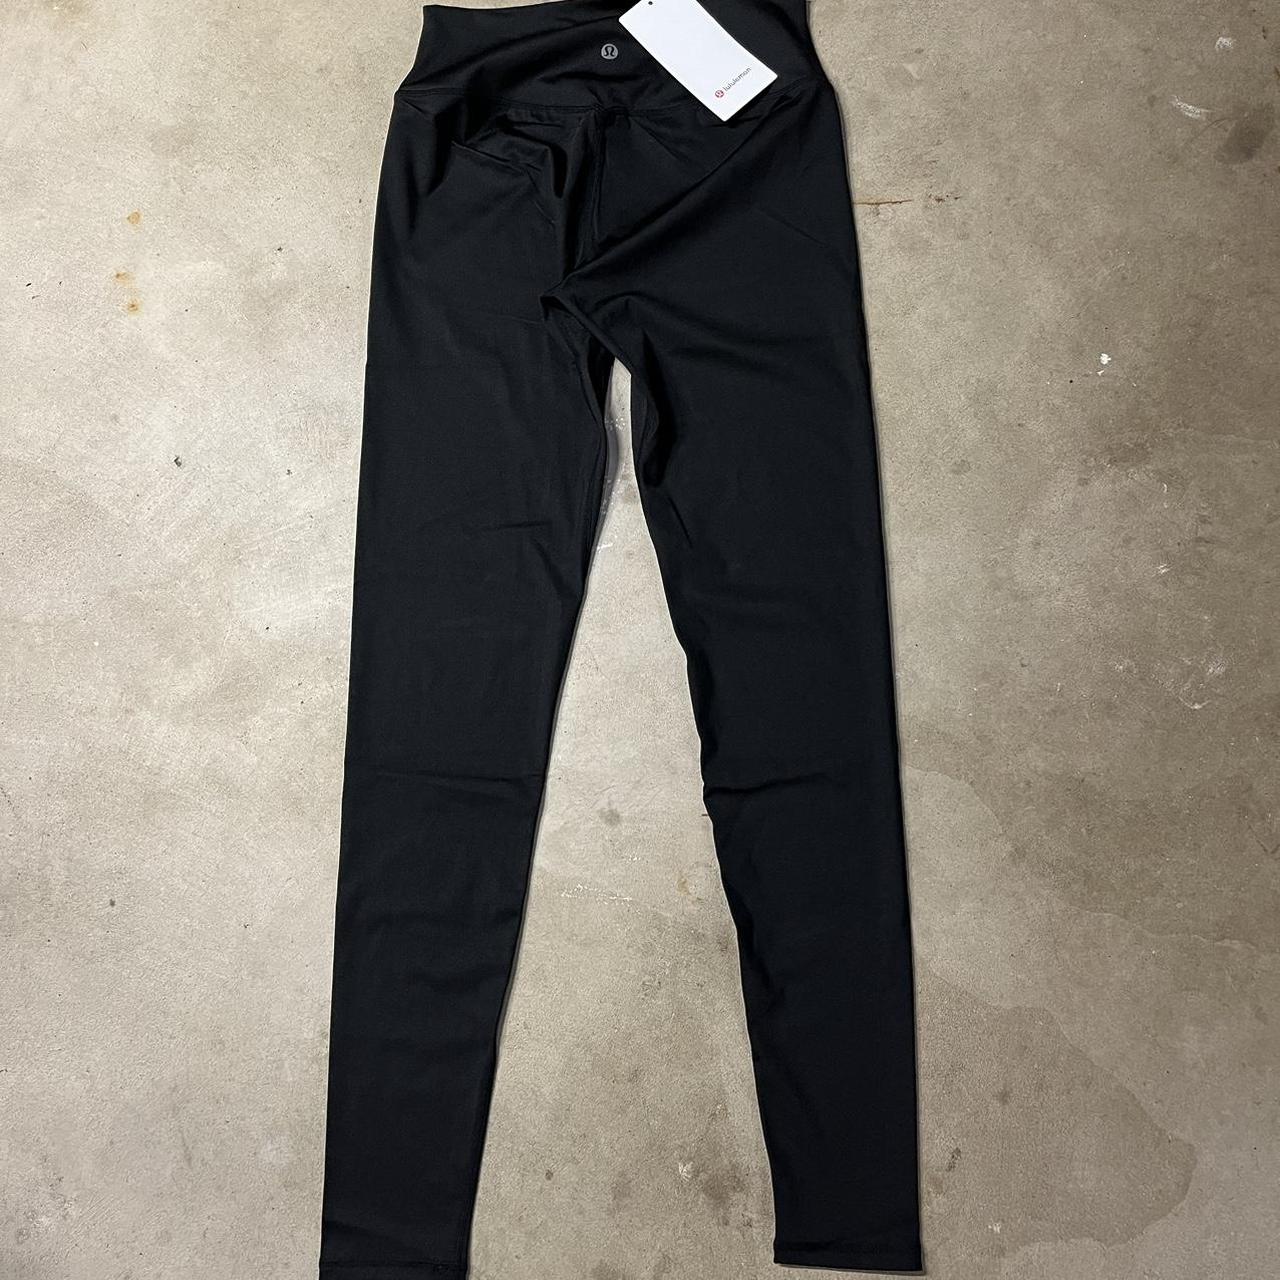 New with tags Lululemon swiftly tech 2.0 size 8 legging